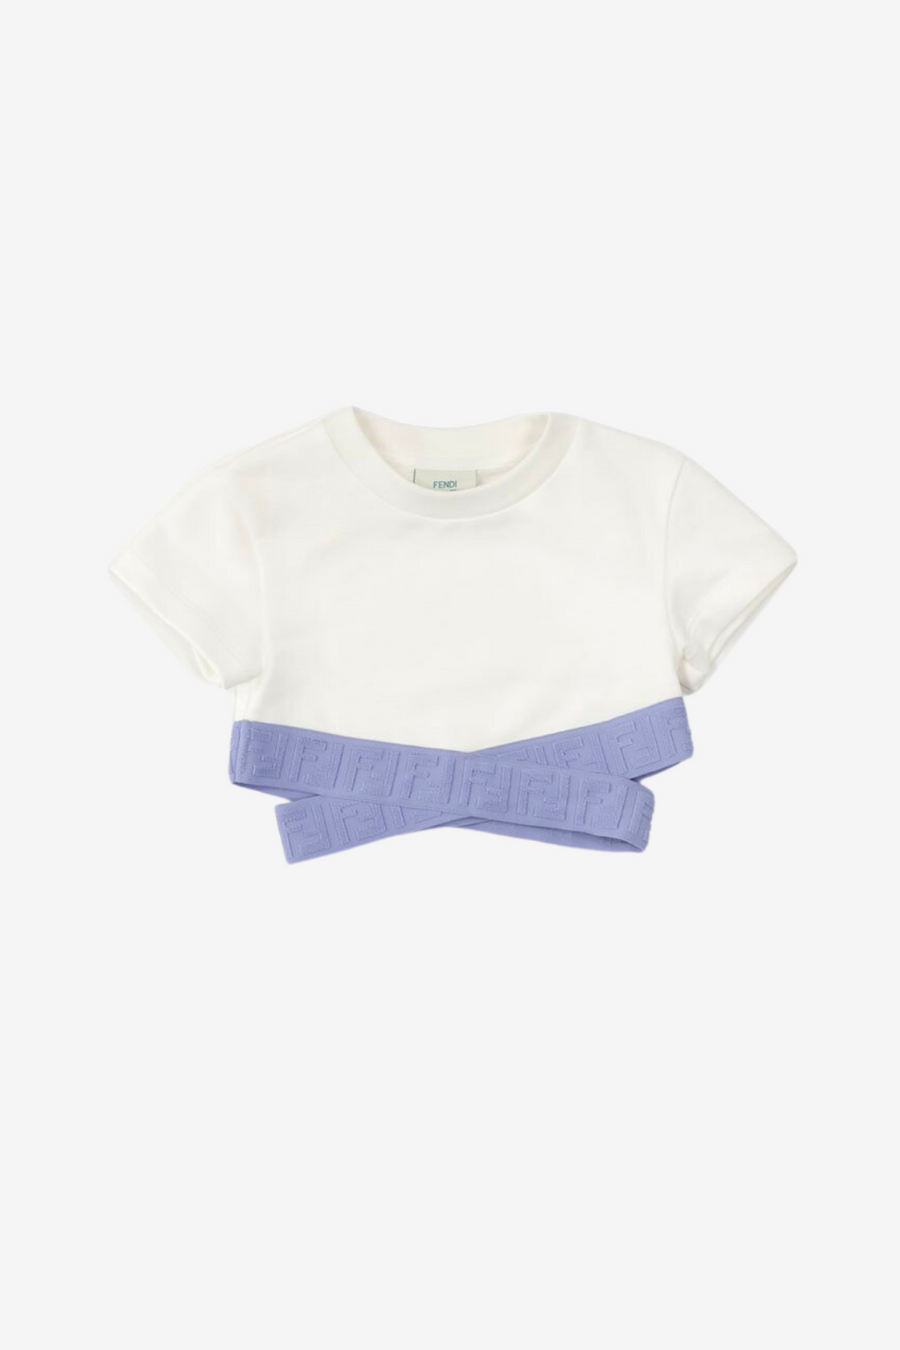 Cropped T-Shirt with FF Fendi Bands